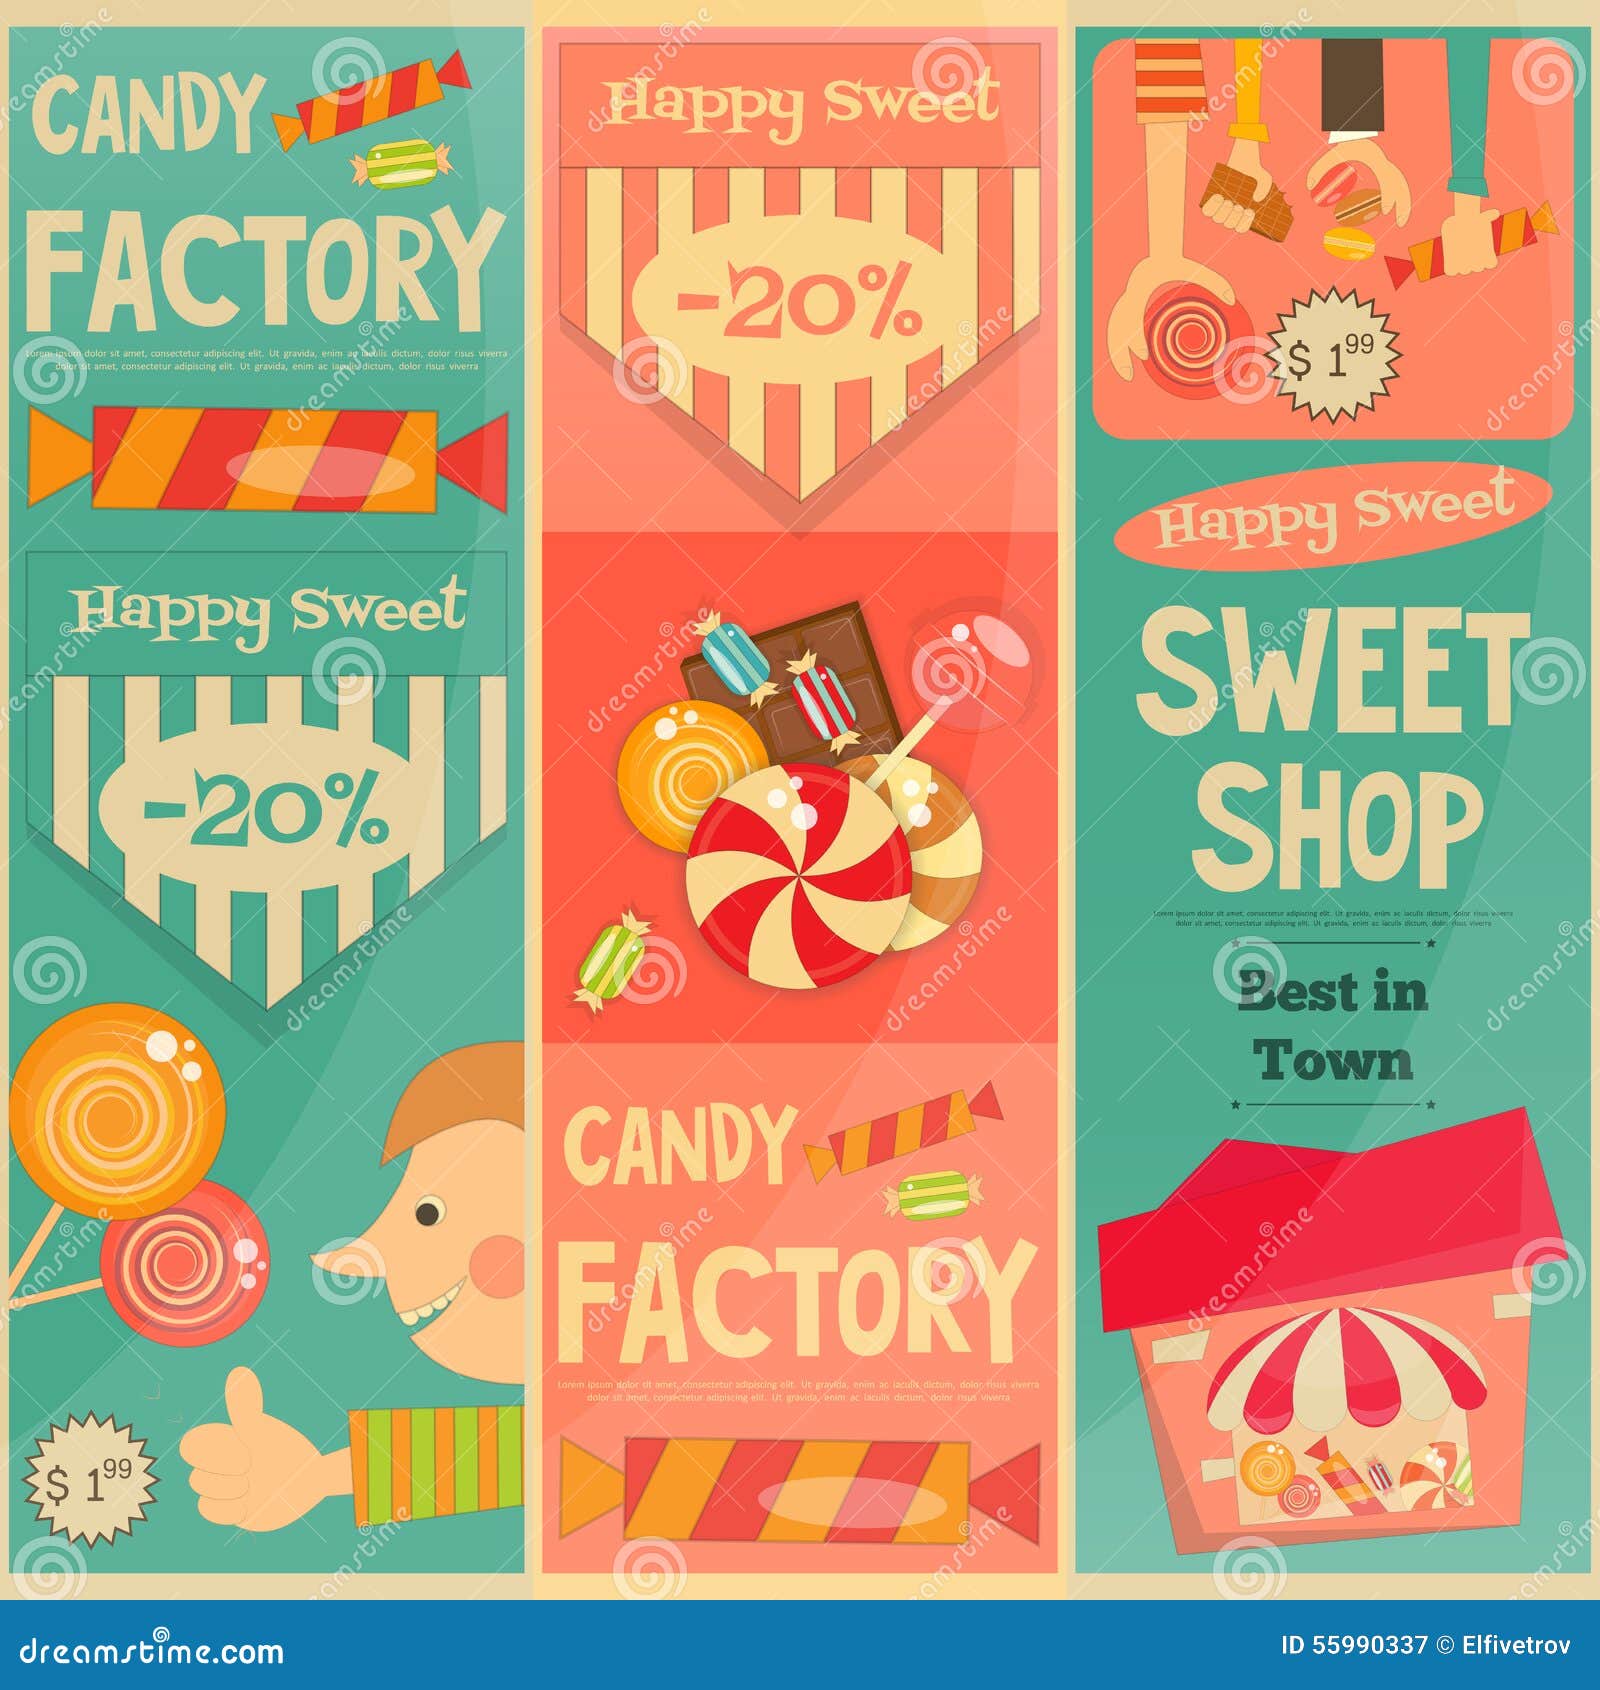 CANDY SHOP SWEET SHOP METAL SIGN 8x10in  sweet shop cafe kitchen confectionay 